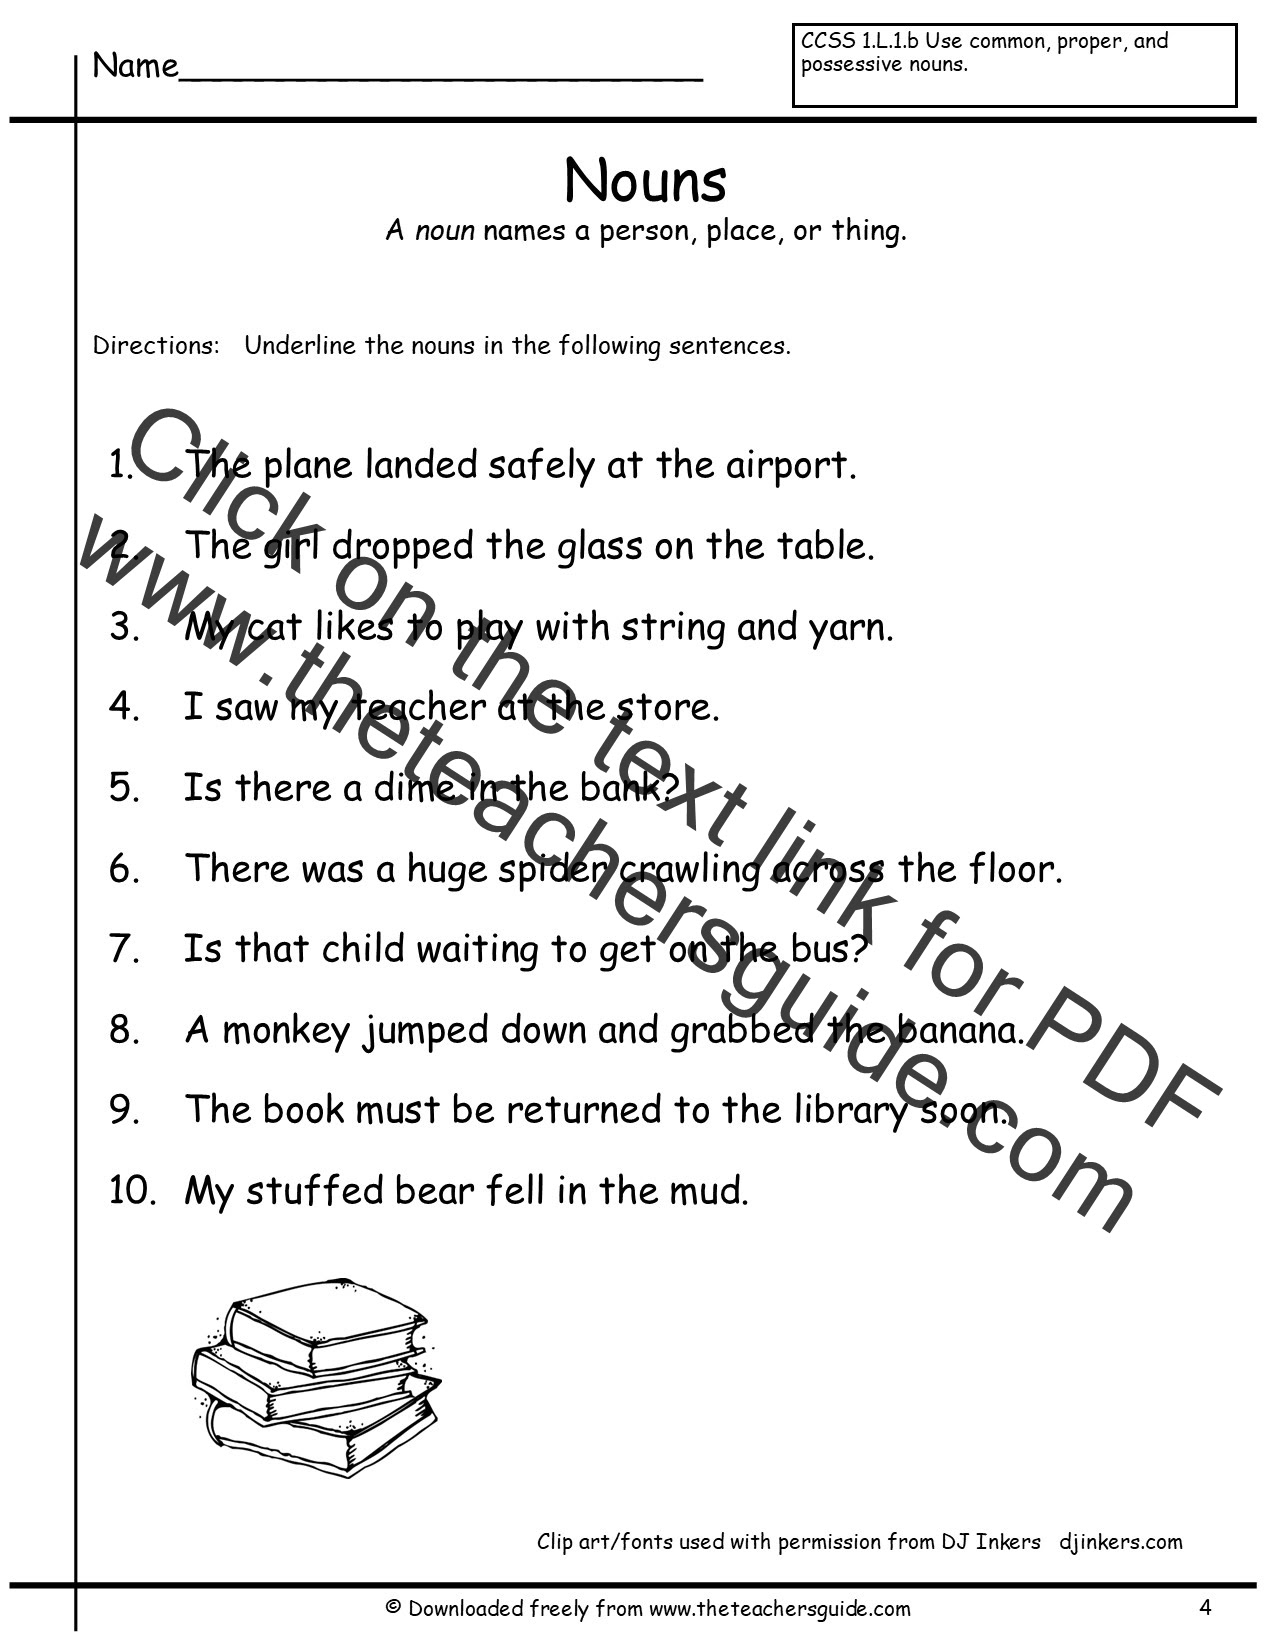  Nouns Exercises For Class 4 Worksheets